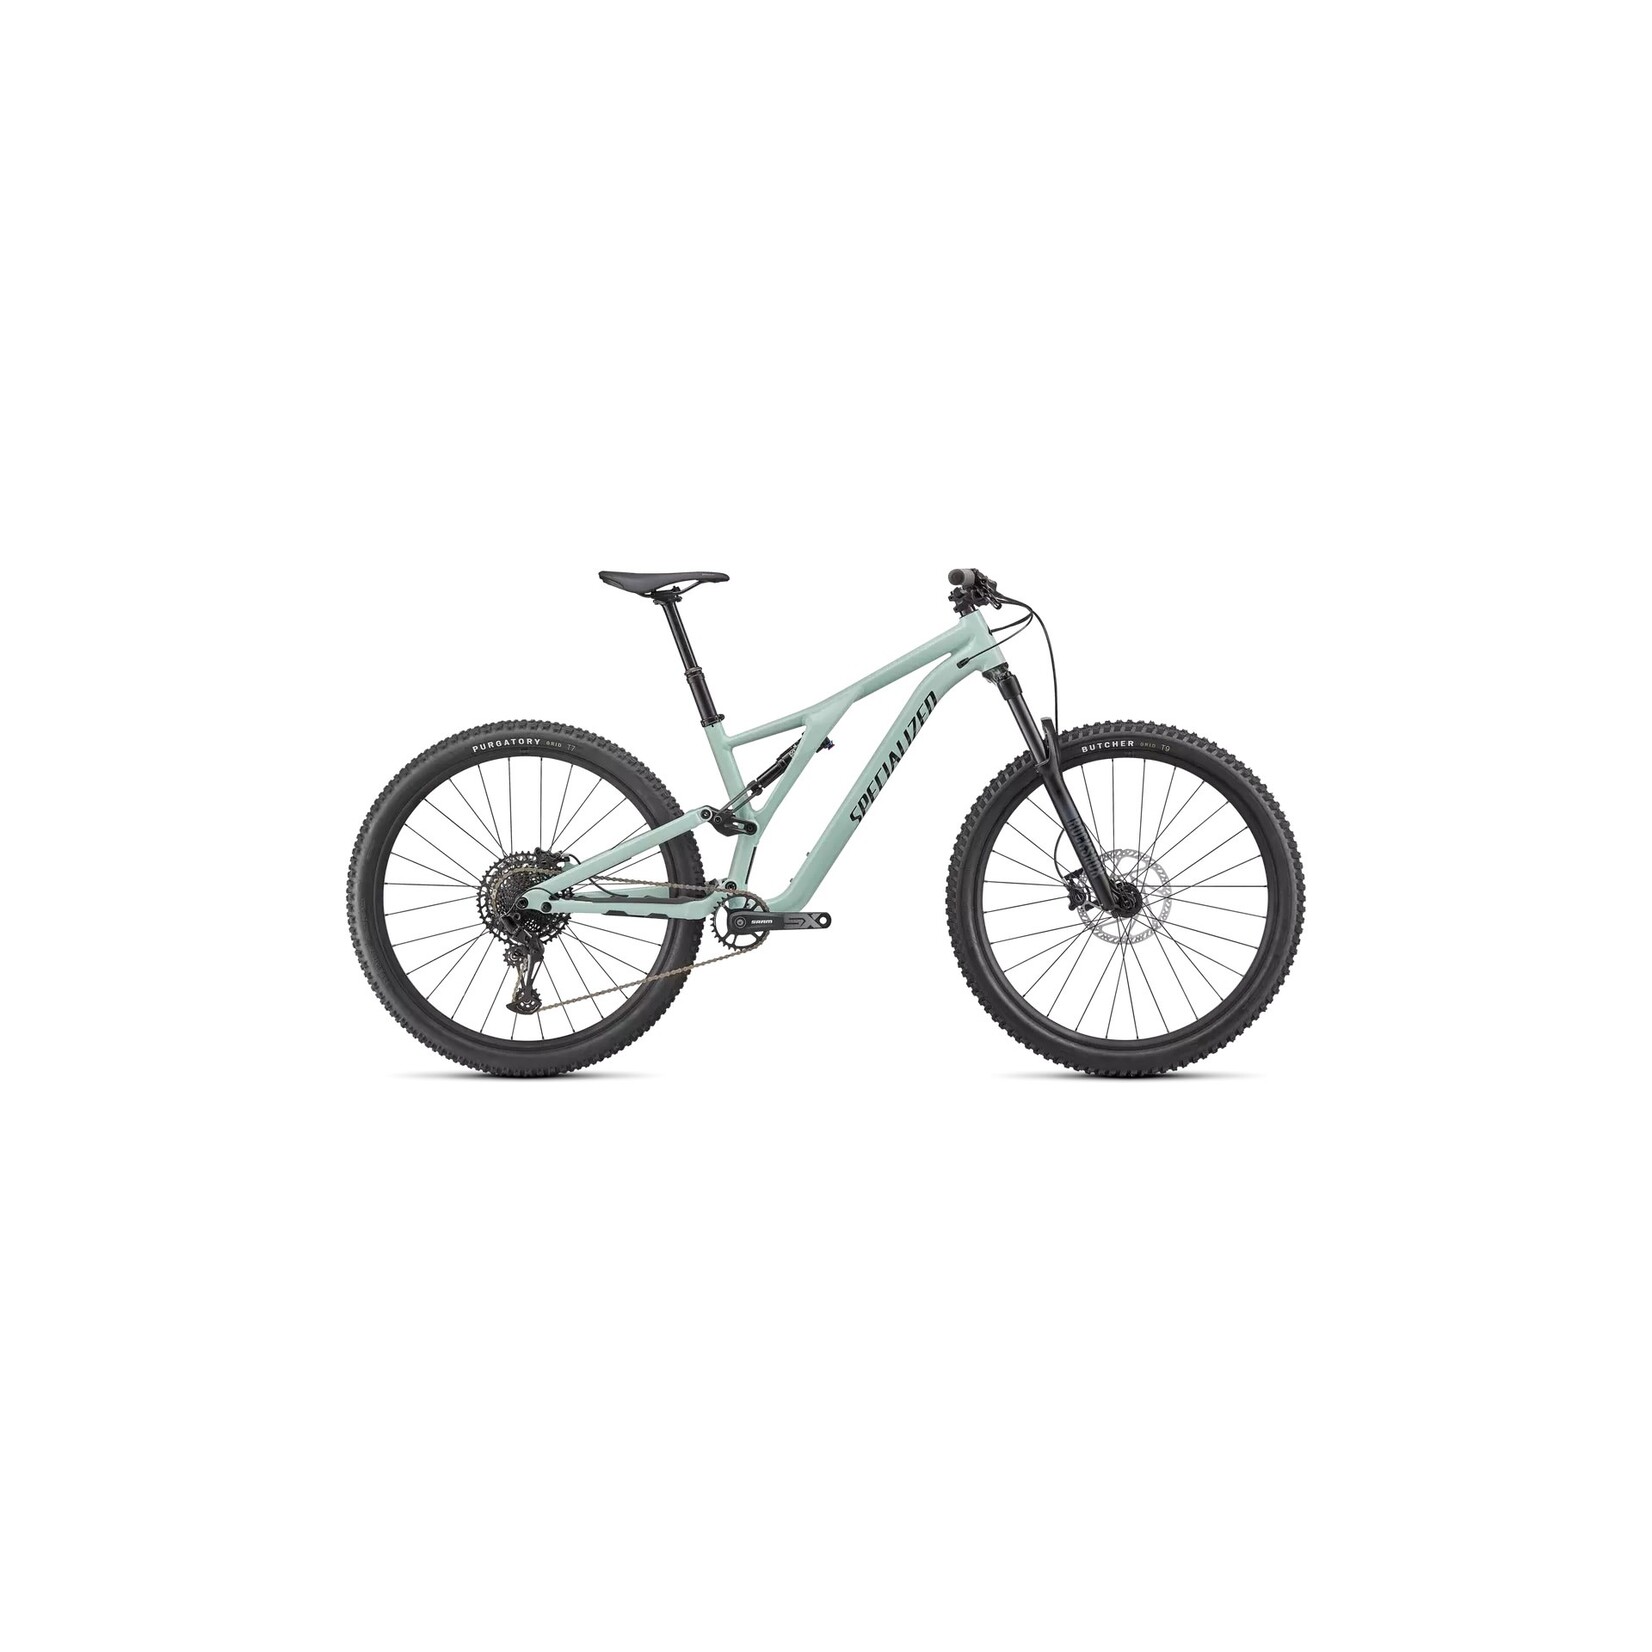 Specialized Stumpjumper Alloy 29